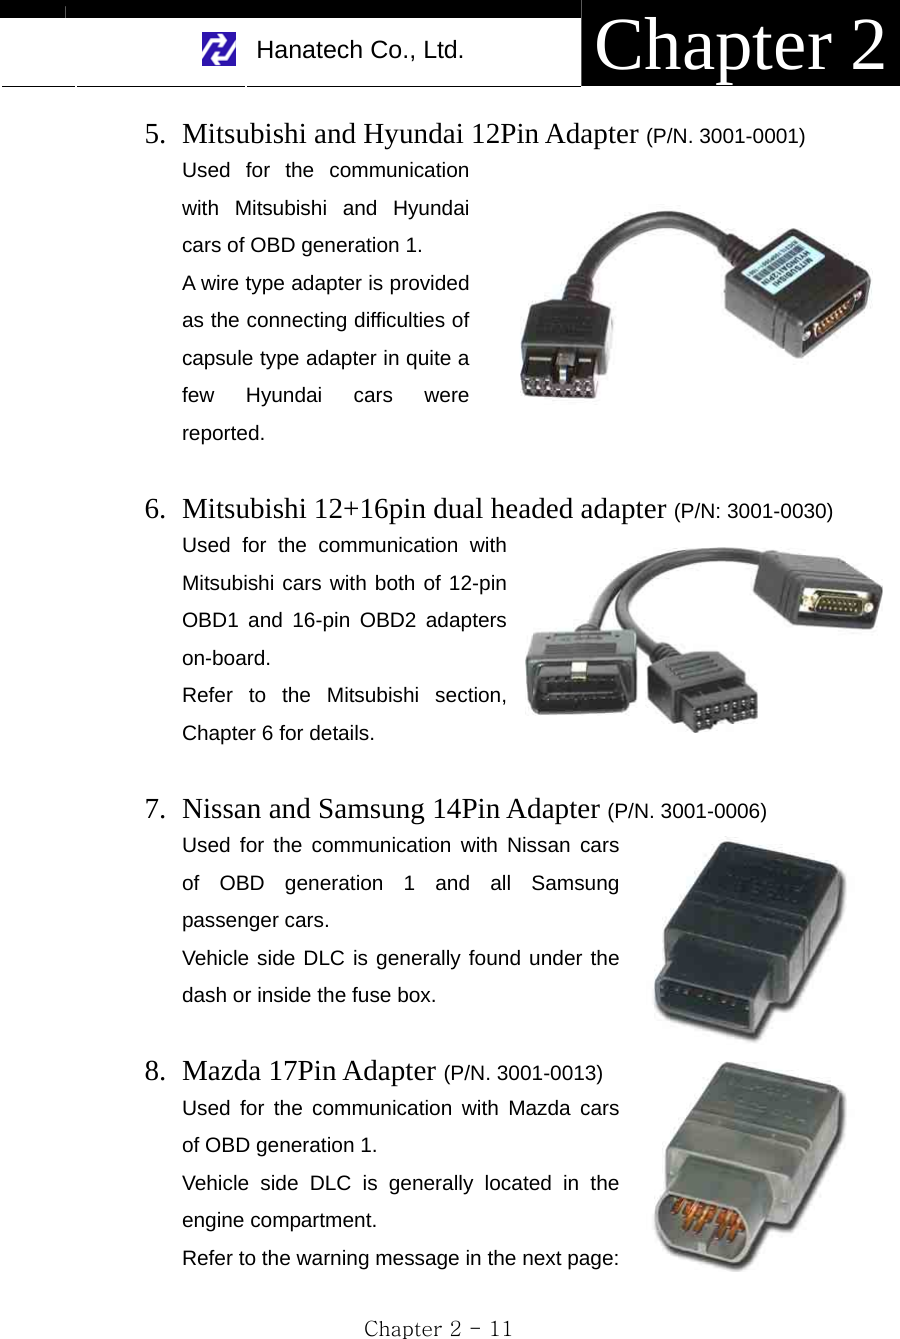     Hanatech Co., Ltd.  Chapter 2 Chapter 2 - 11 5. Mitsubishi and Hyundai 12Pin Adapter (P/N. 3001-0001) Used for the communication with Mitsubishi and Hyundai cars of OBD generation 1.     A wire type adapter is provided as the connecting difficulties of capsule type adapter in quite a few Hyundai cars were reported.  6. Mitsubishi 12+16pin dual headed adapter (P/N: 3001-0030) Used for the communication with Mitsubishi cars with both of 12-pin OBD1 and 16-pin OBD2 adapters on-board. Refer to the Mitsubishi section, Chapter 6 for details.  7. Nissan and Samsung 14Pin Adapter (P/N. 3001-0006) Used for the communication with Nissan cars of OBD generation 1 and all Samsung passenger cars.   Vehicle side DLC is generally found under the dash or inside the fuse box.  8. Mazda 17Pin Adapter (P/N. 3001-0013) Used for the communication with Mazda cars of OBD generation 1. Vehicle side DLC is generally located in the engine compartment. Refer to the warning message in the next page: 